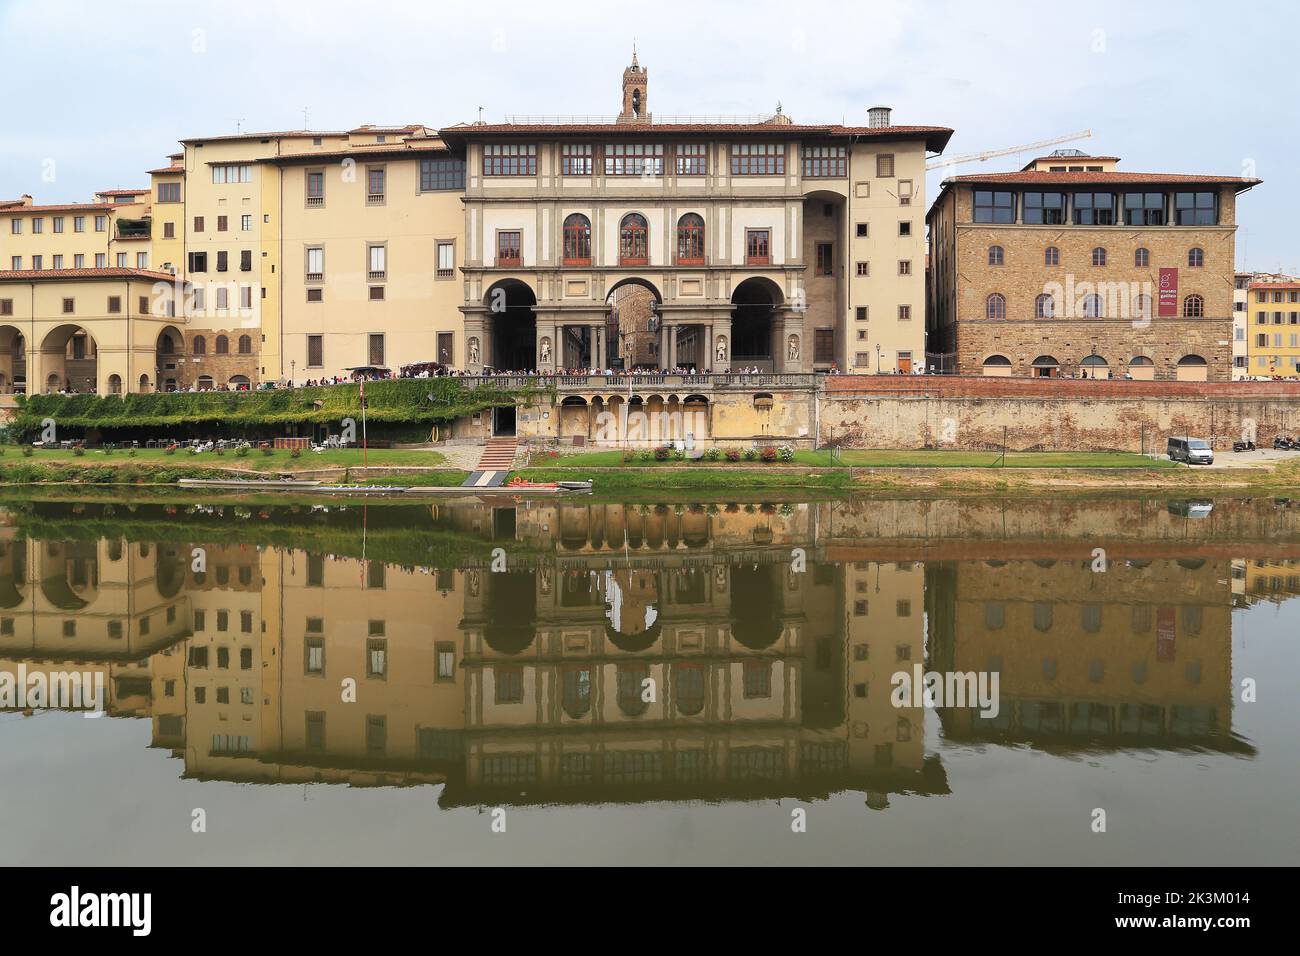 FLORENCE, ITALY - SEPTEMBER 13, 2018: This is a view of the Medici Embankment and the Uffizi Gallery. Stock Photo